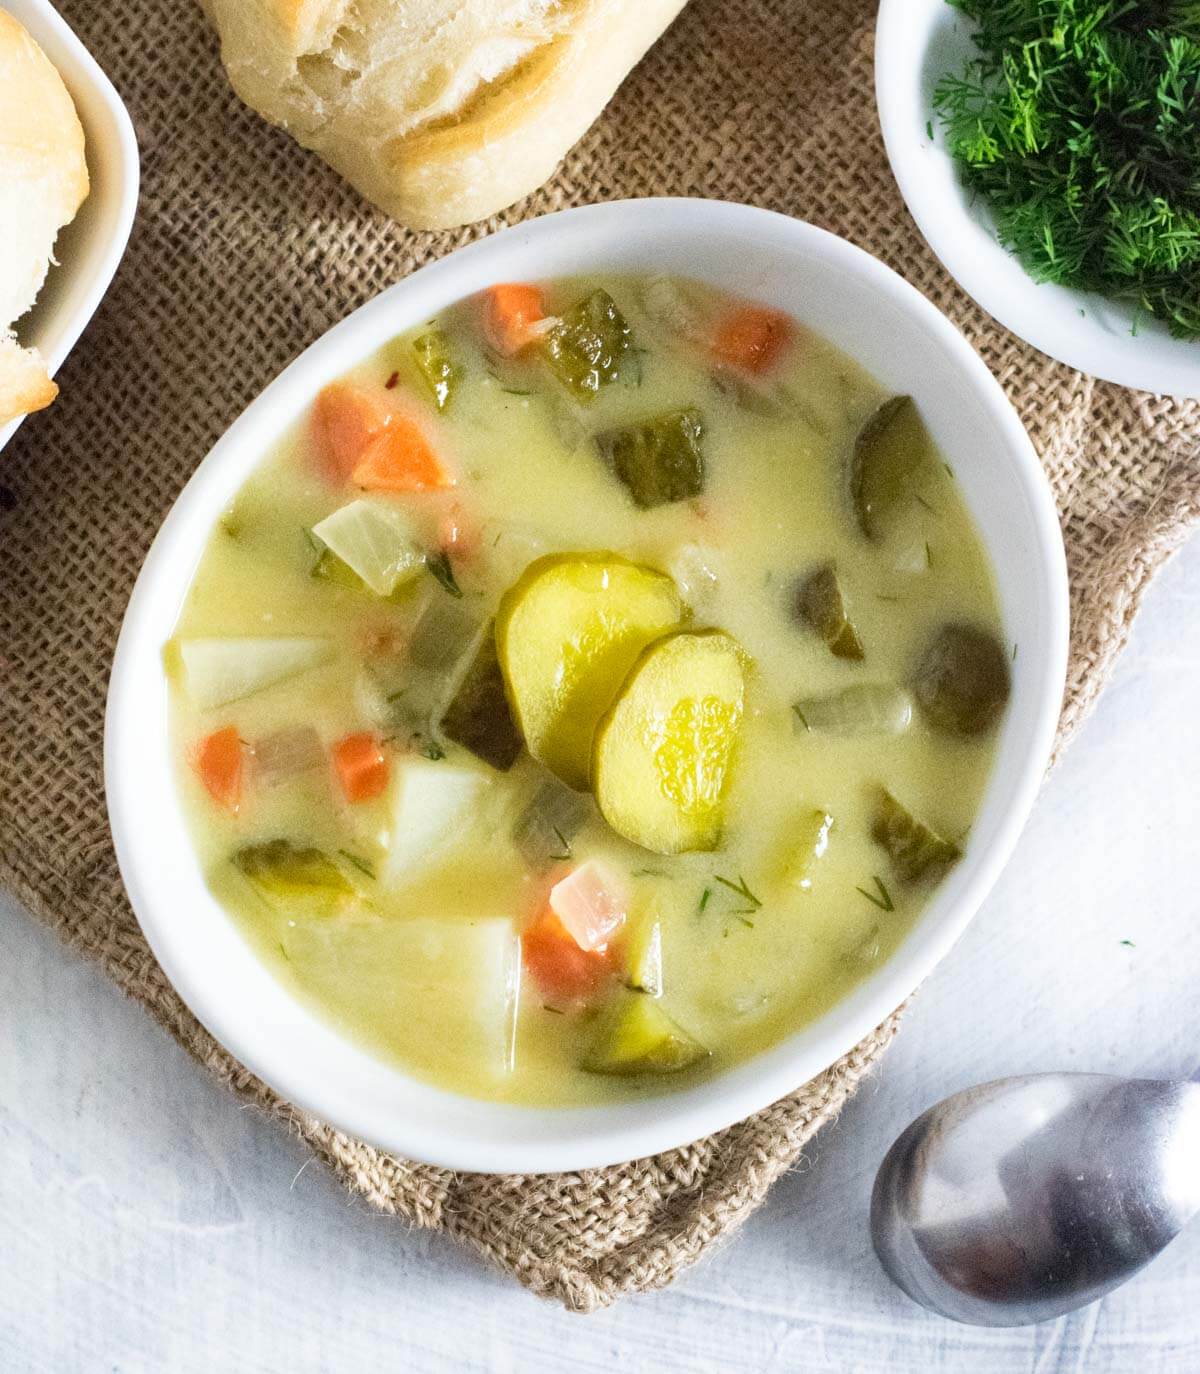 Serving dill pickle soup.